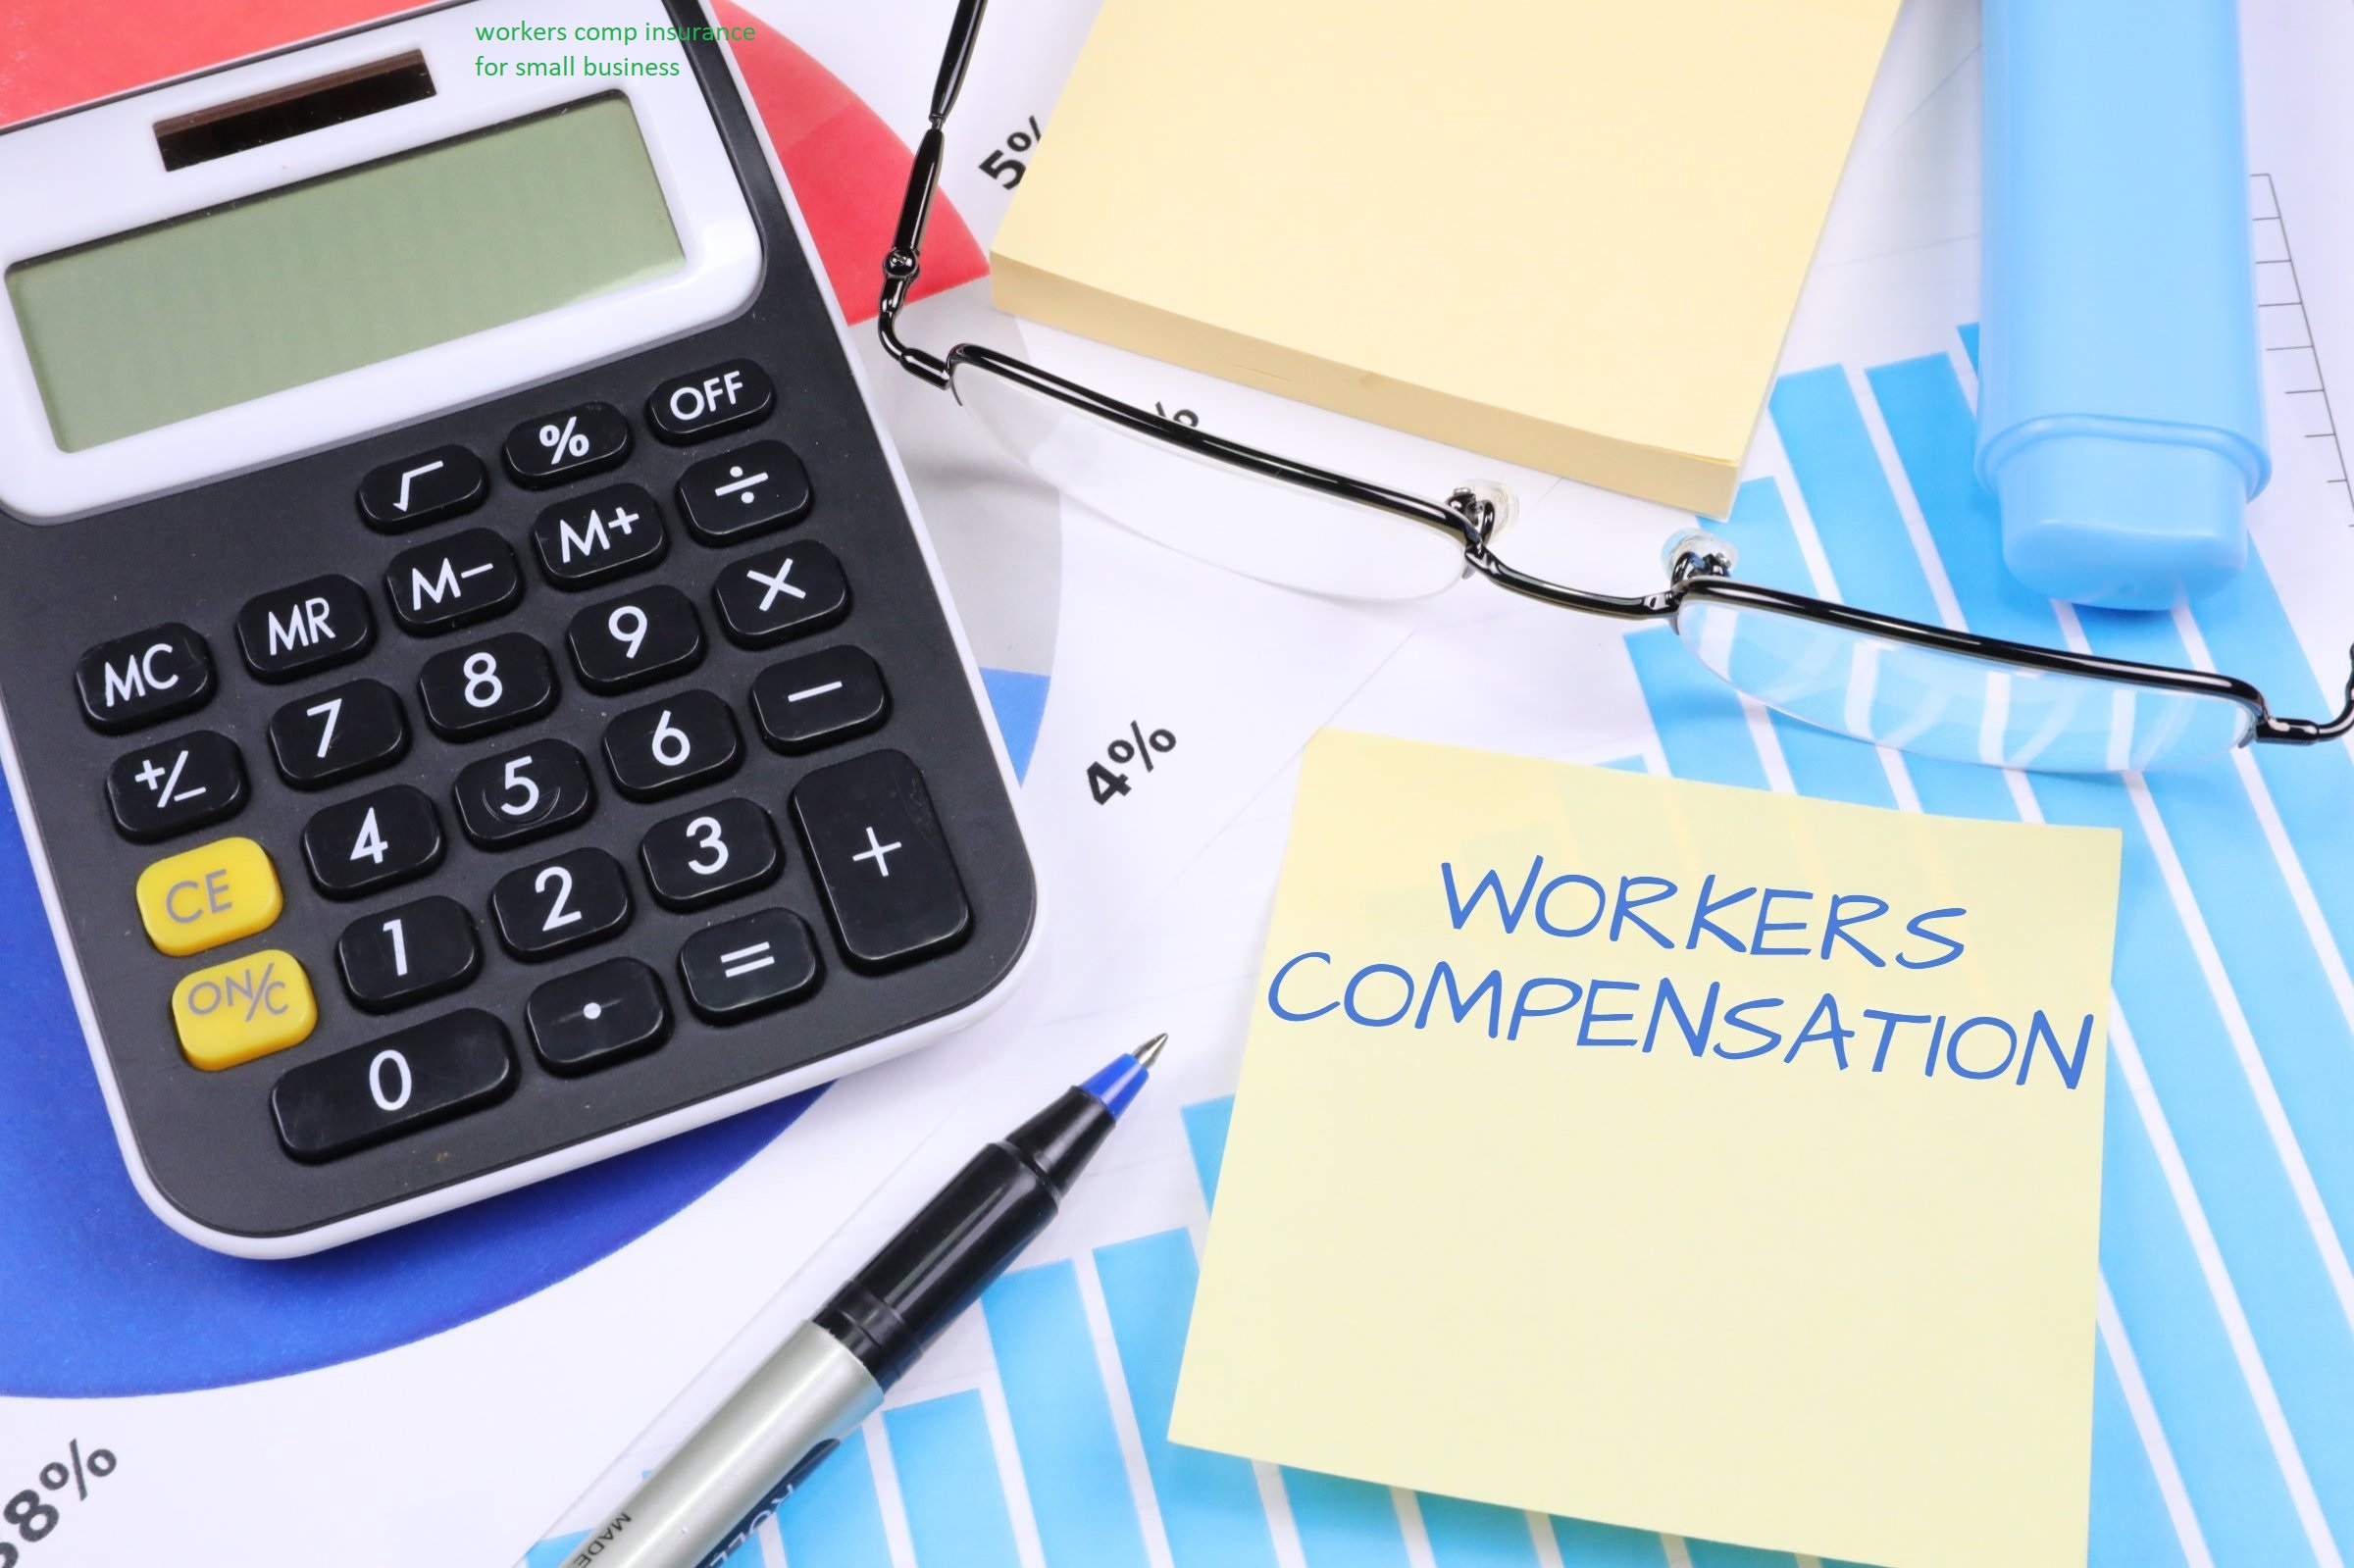 workers comp insurance for small business